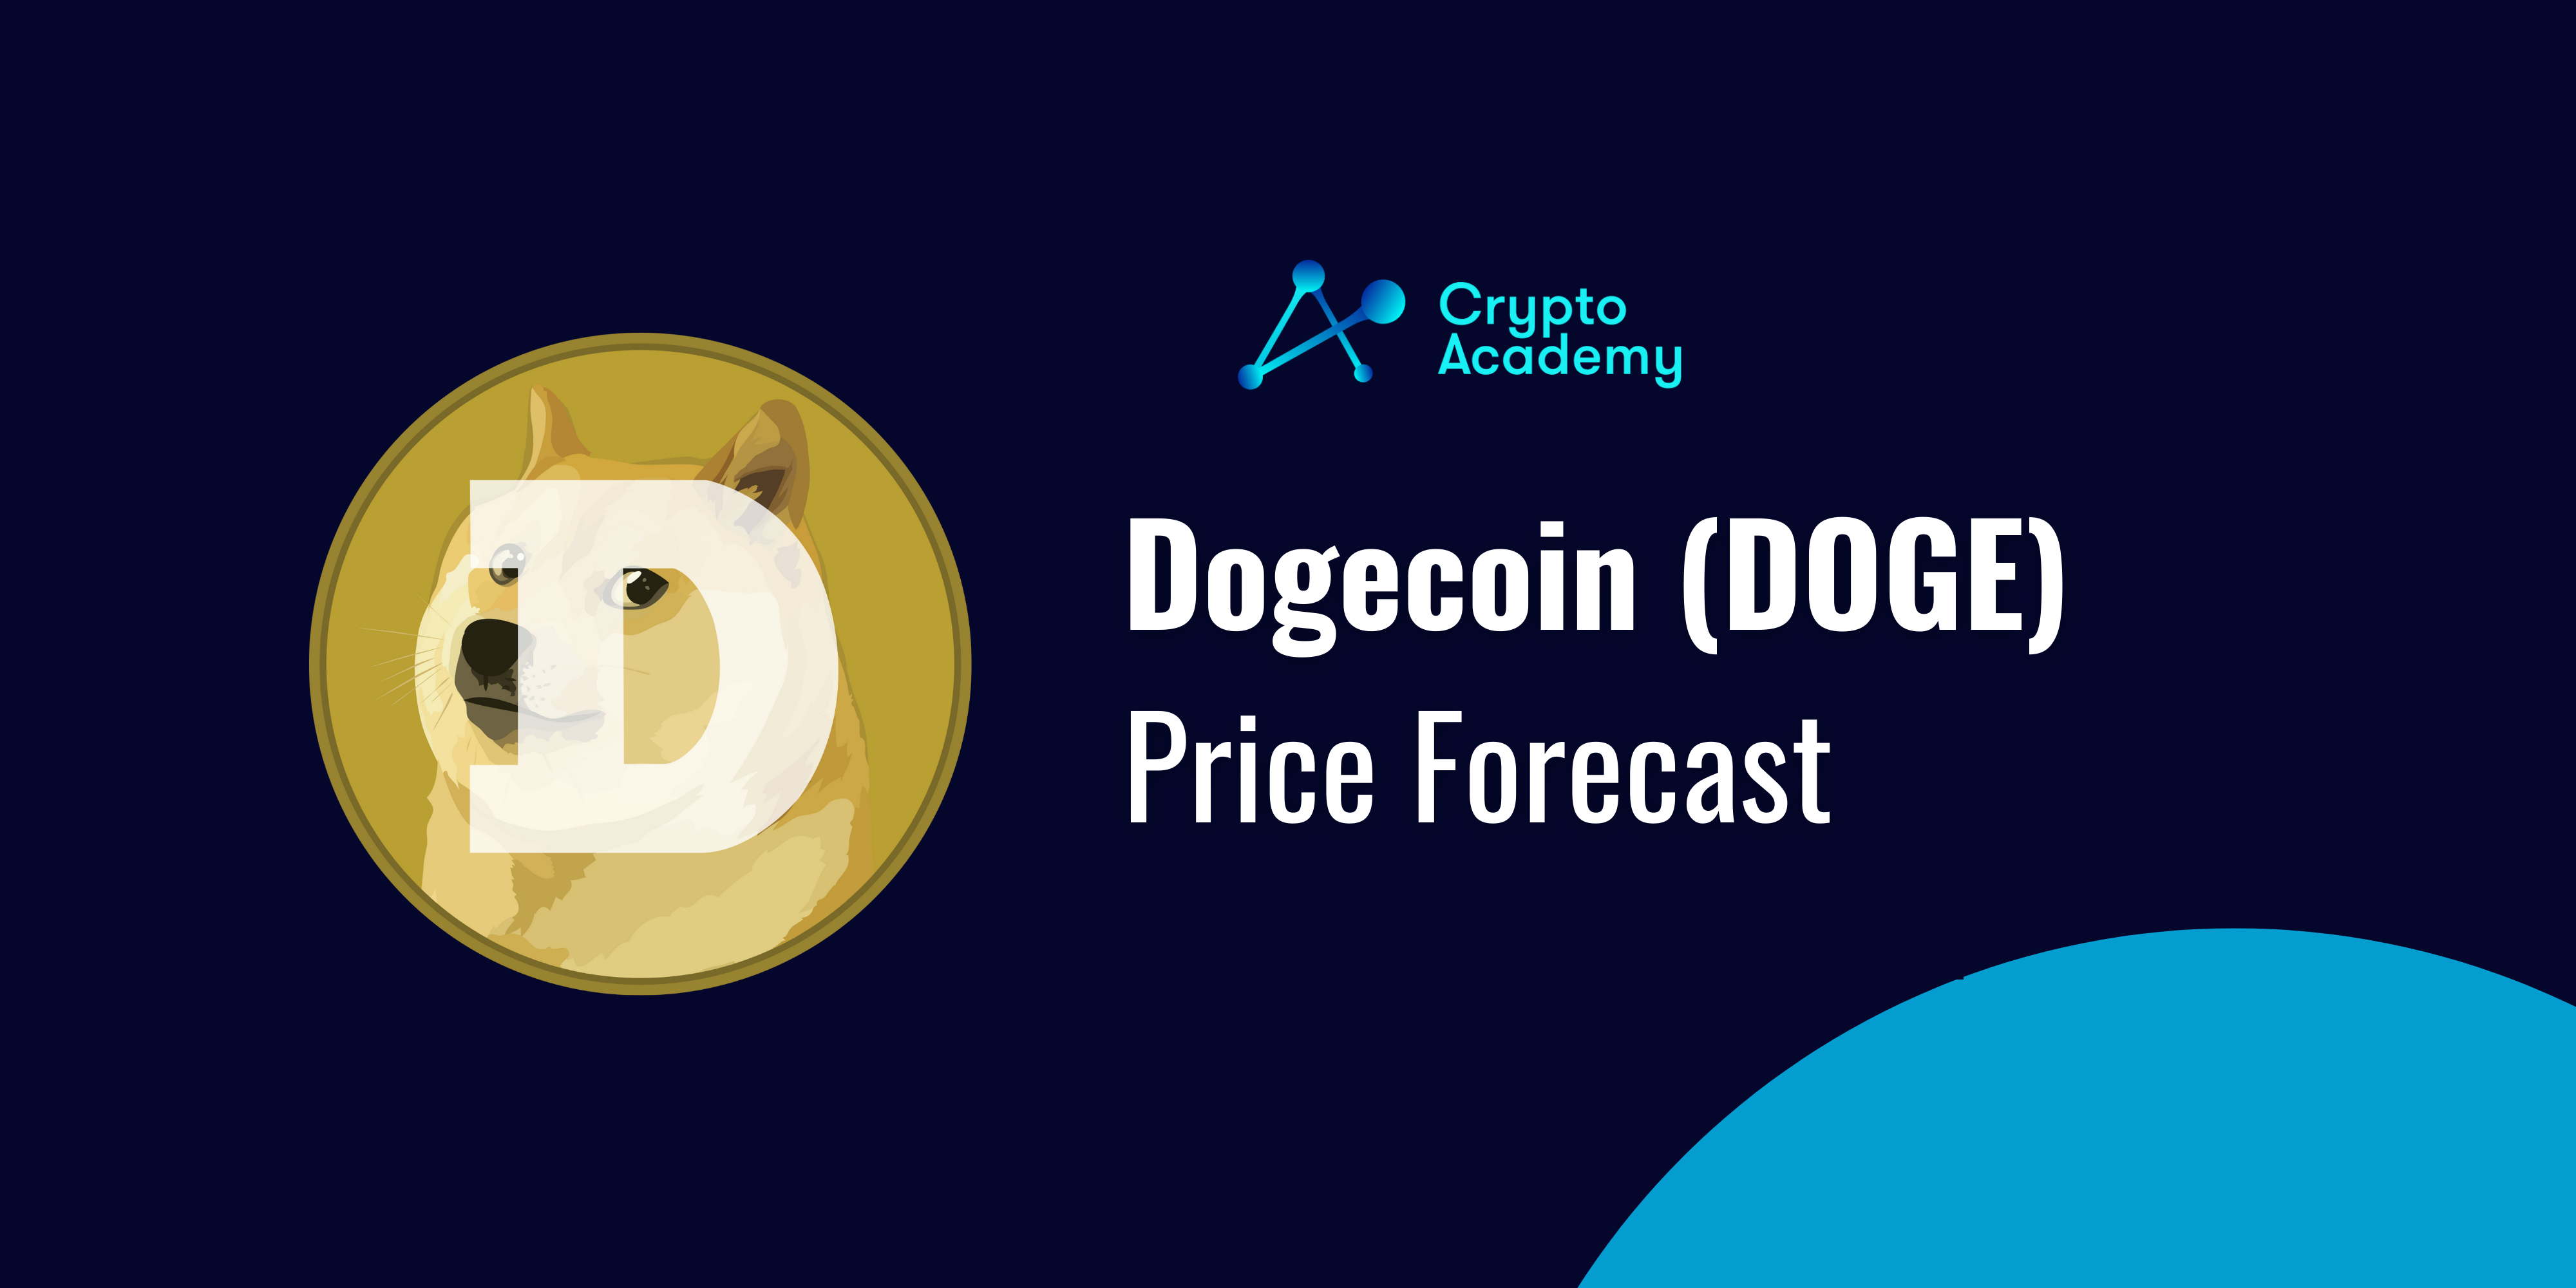 Dogecoin Price Forecast - Will DOGE Reach $1 in 2021?